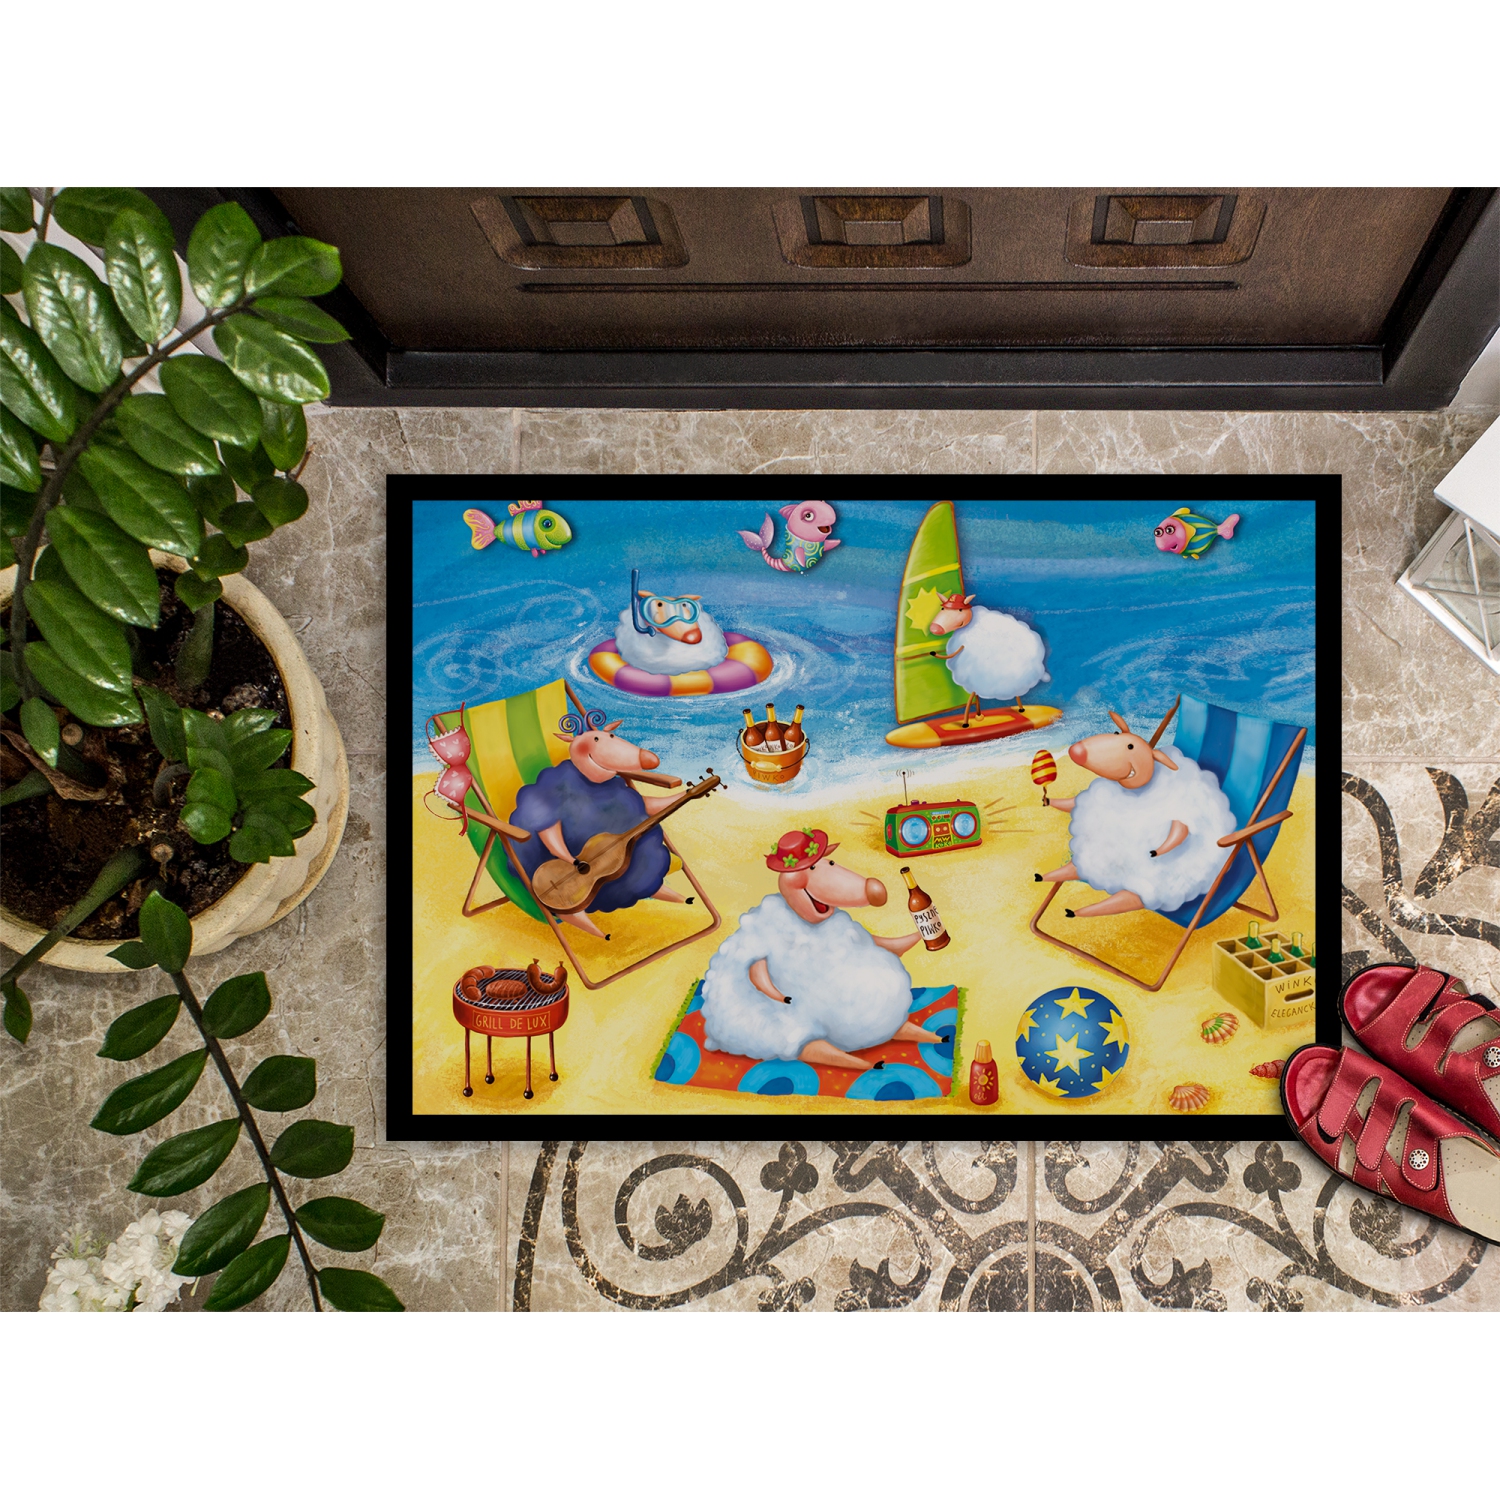 Carolines Treasures Party Pigs on The Beach Indoor or Outdoor Mat 24x36 APH0081JMAT 24 x 36 Multicolor